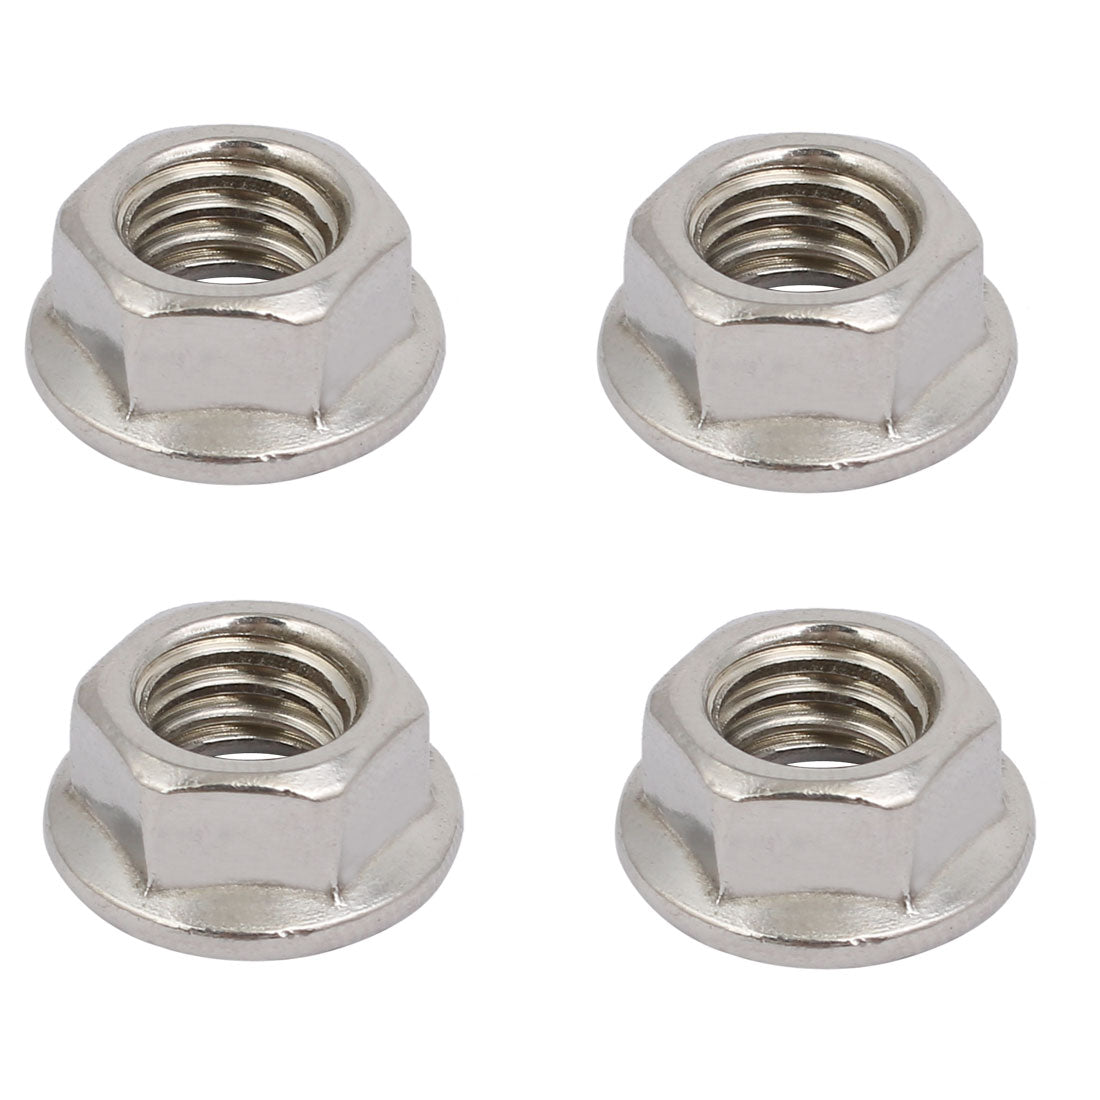 uxcell Uxcell 4pcs 3/8"-16 UNC Thread 304 Stainless Steel Hex Serrated Flange Nut Fastener